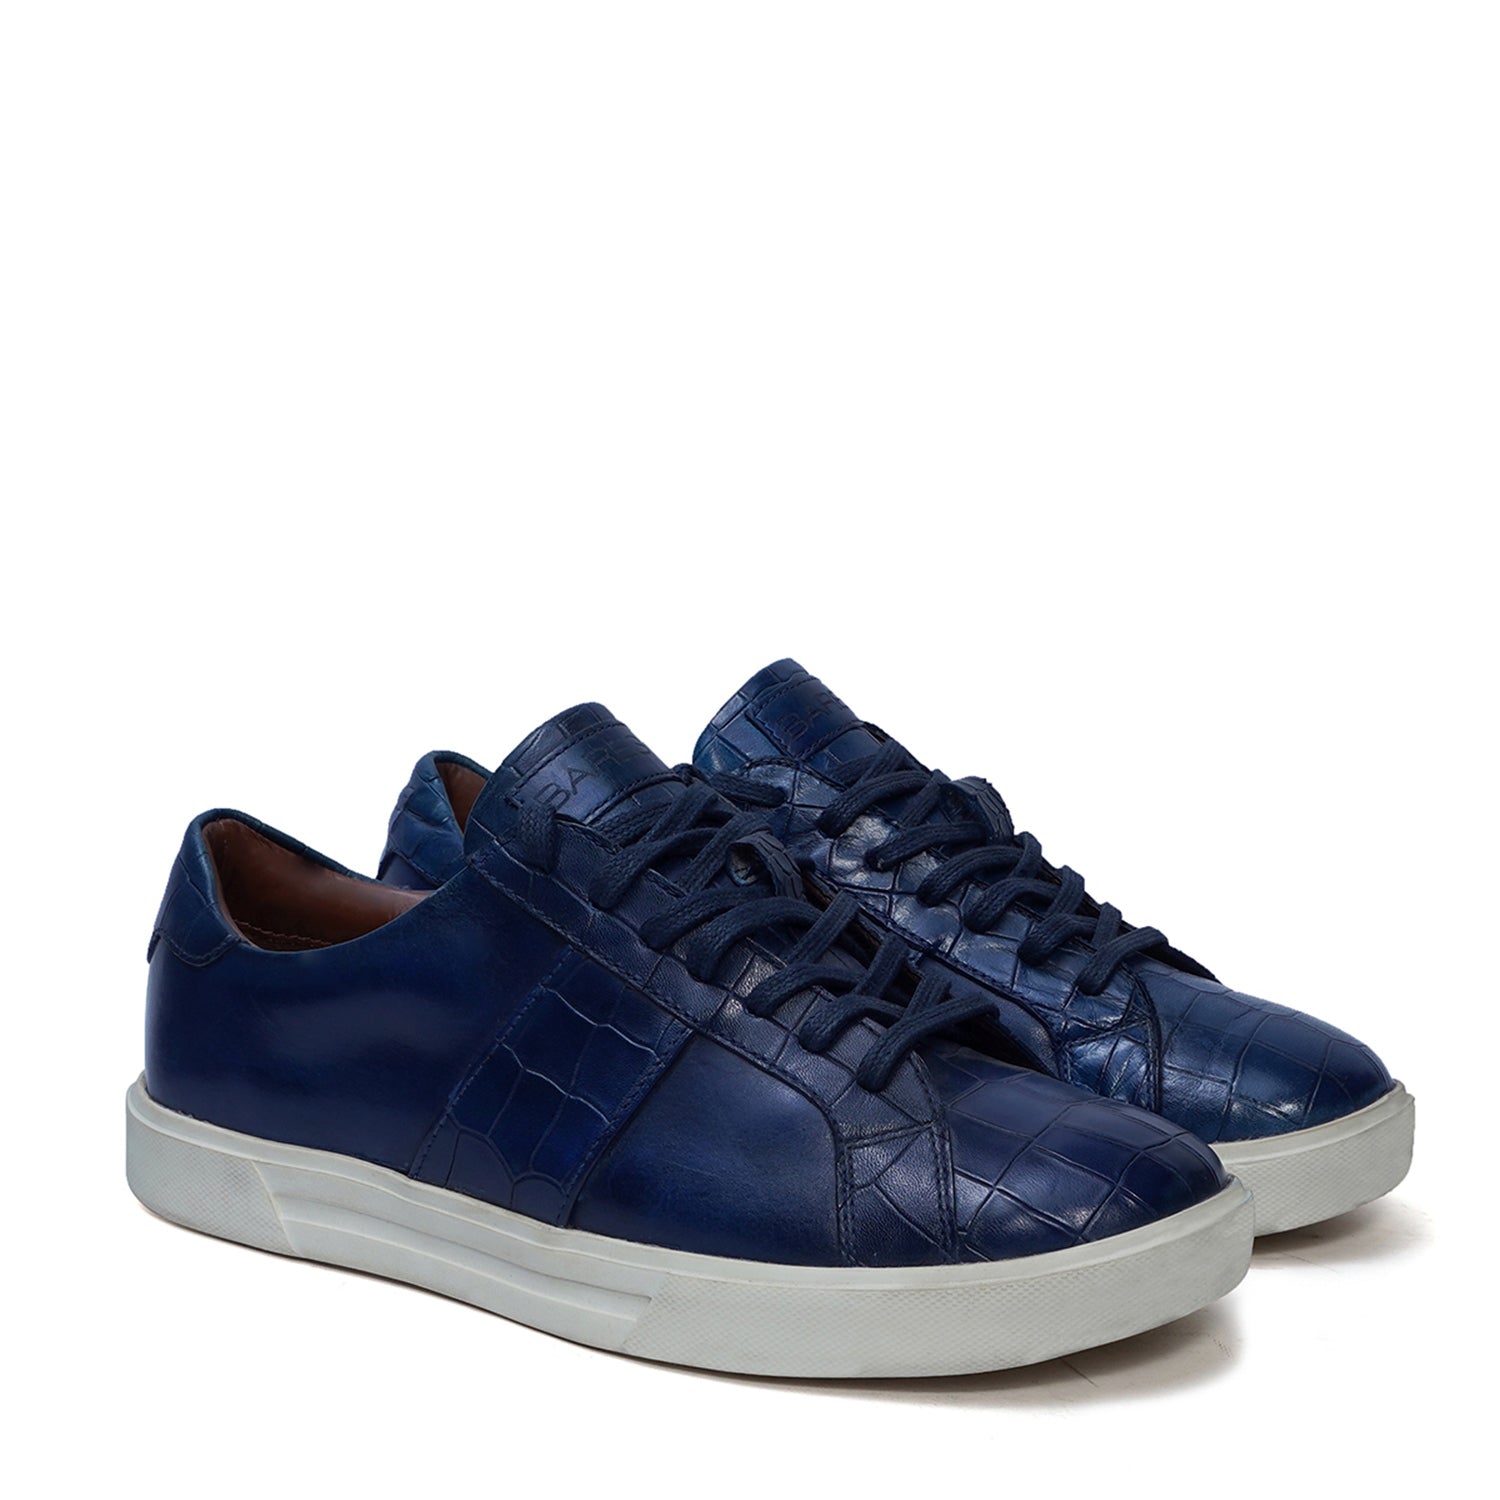 Low Top Deep Cut Leather Blue Sneaker with Lace-Up Closure